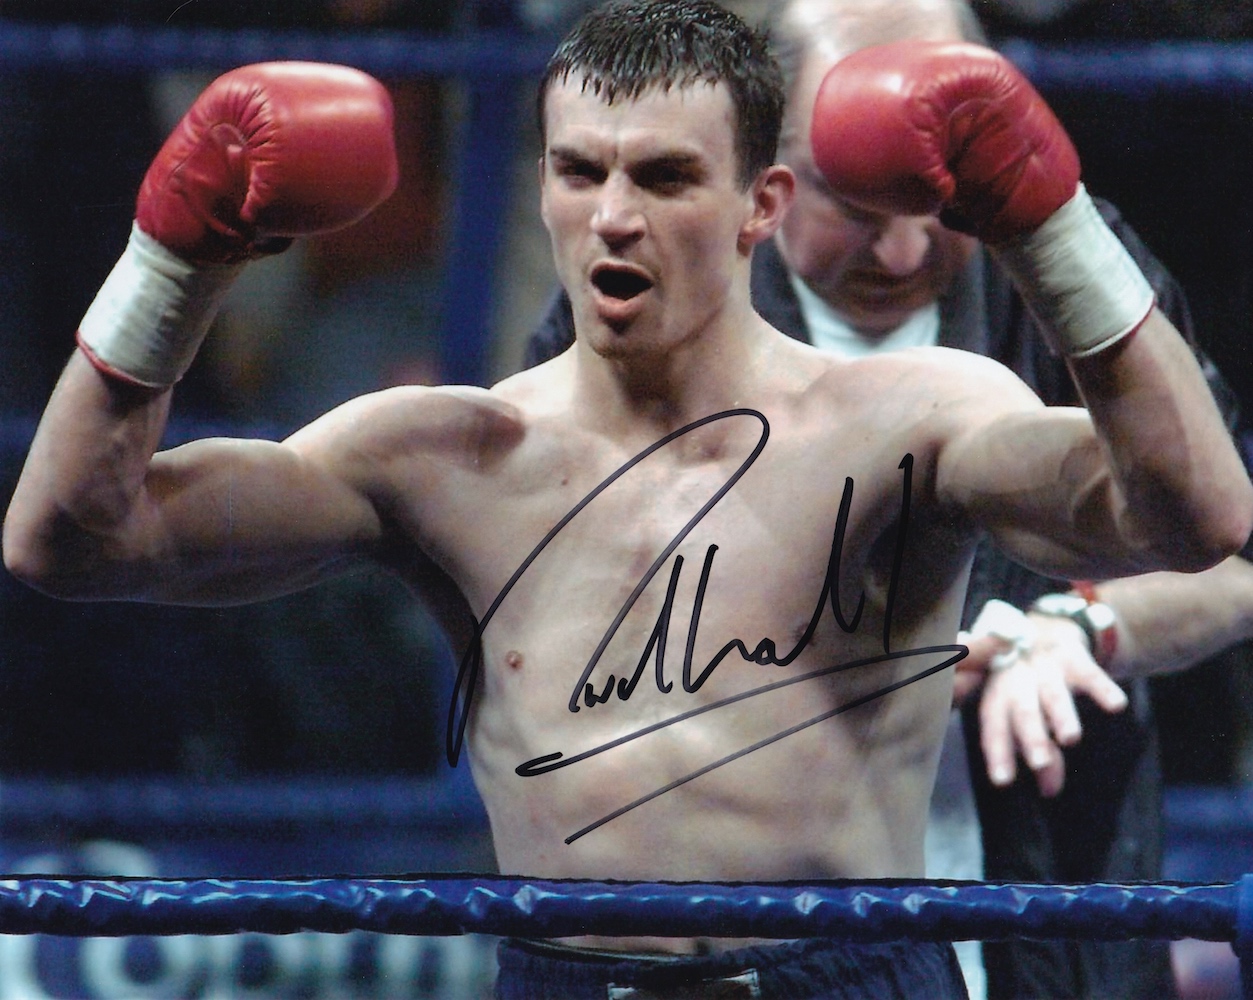 Richie Woodhall, Former World Champion Boxer, 10x8 inch Signed Photo. Good condition. All autographs